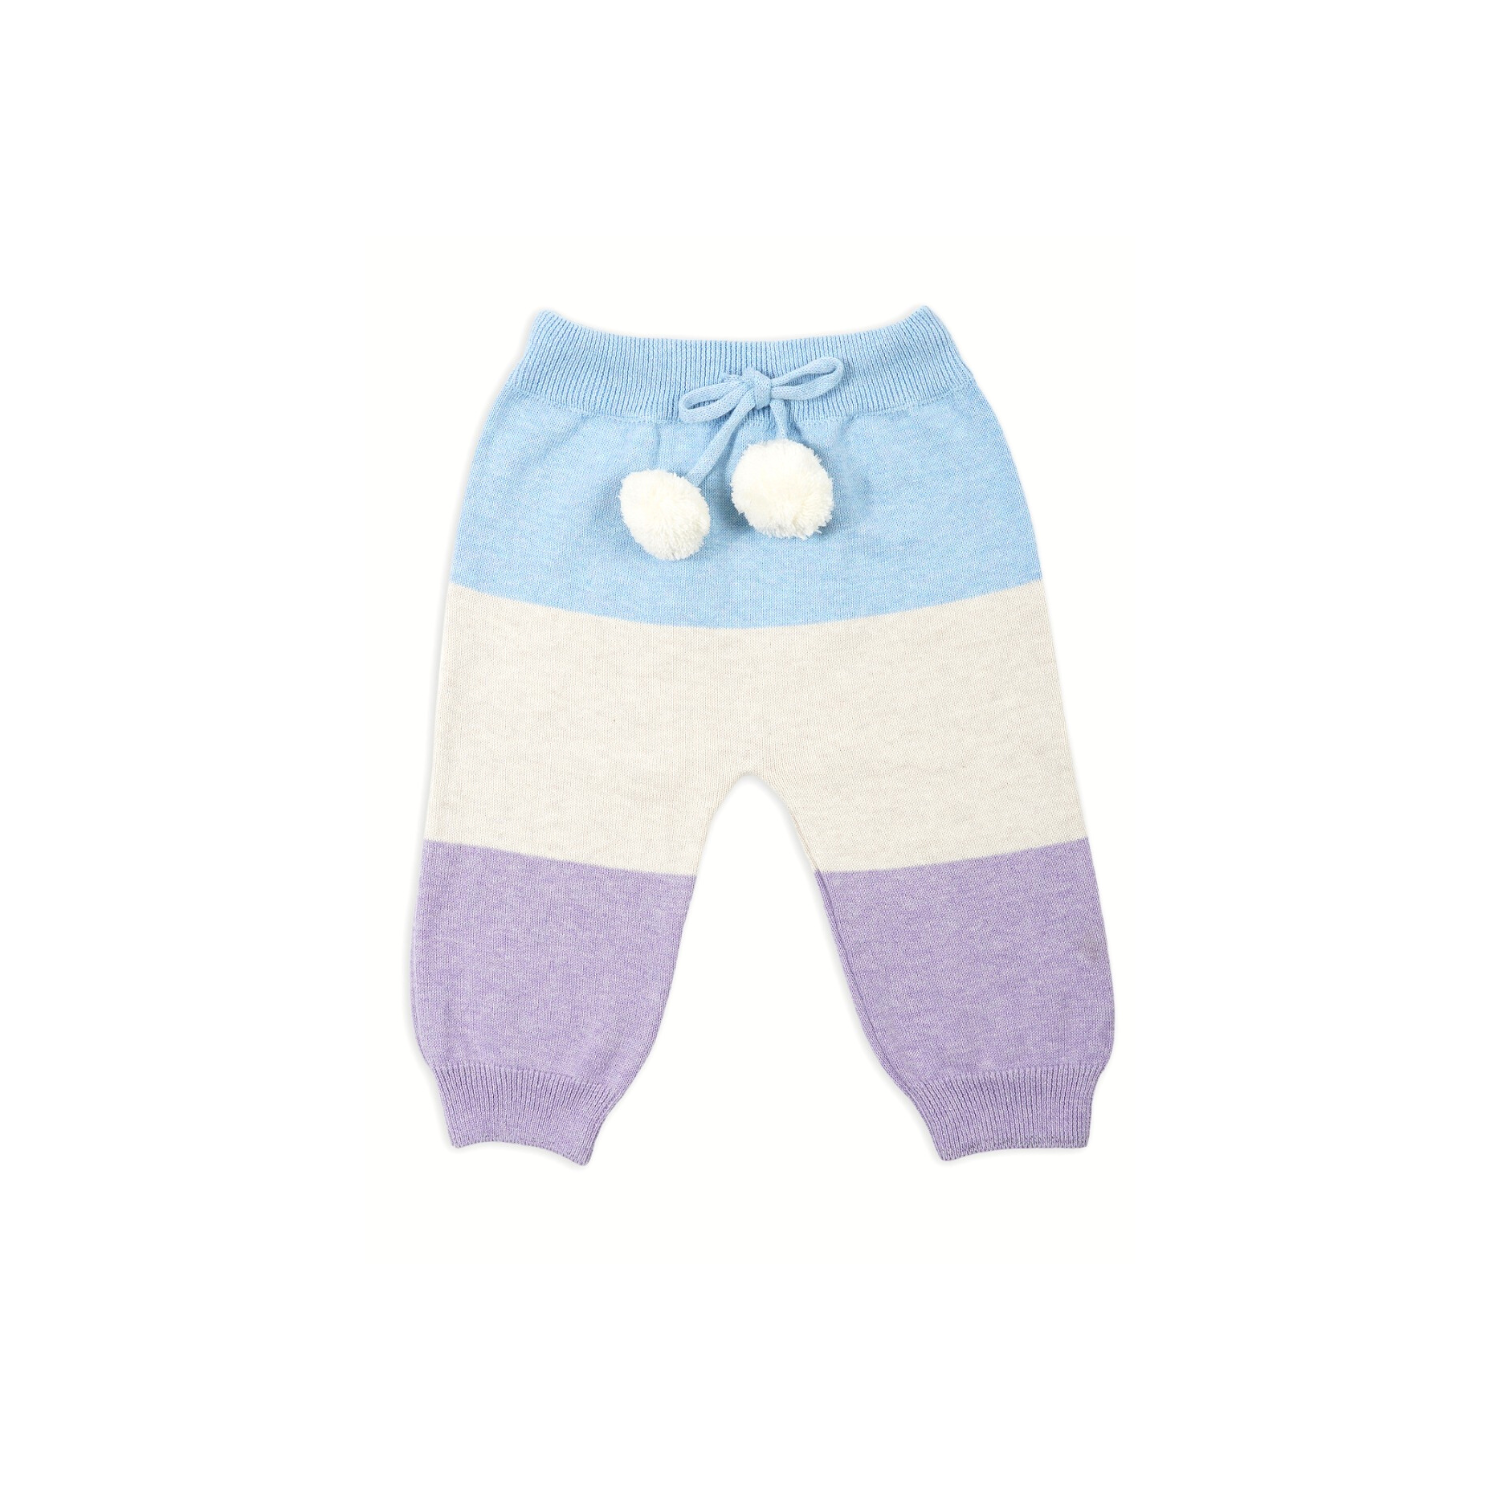 Soothing Stripe Diaper Lower